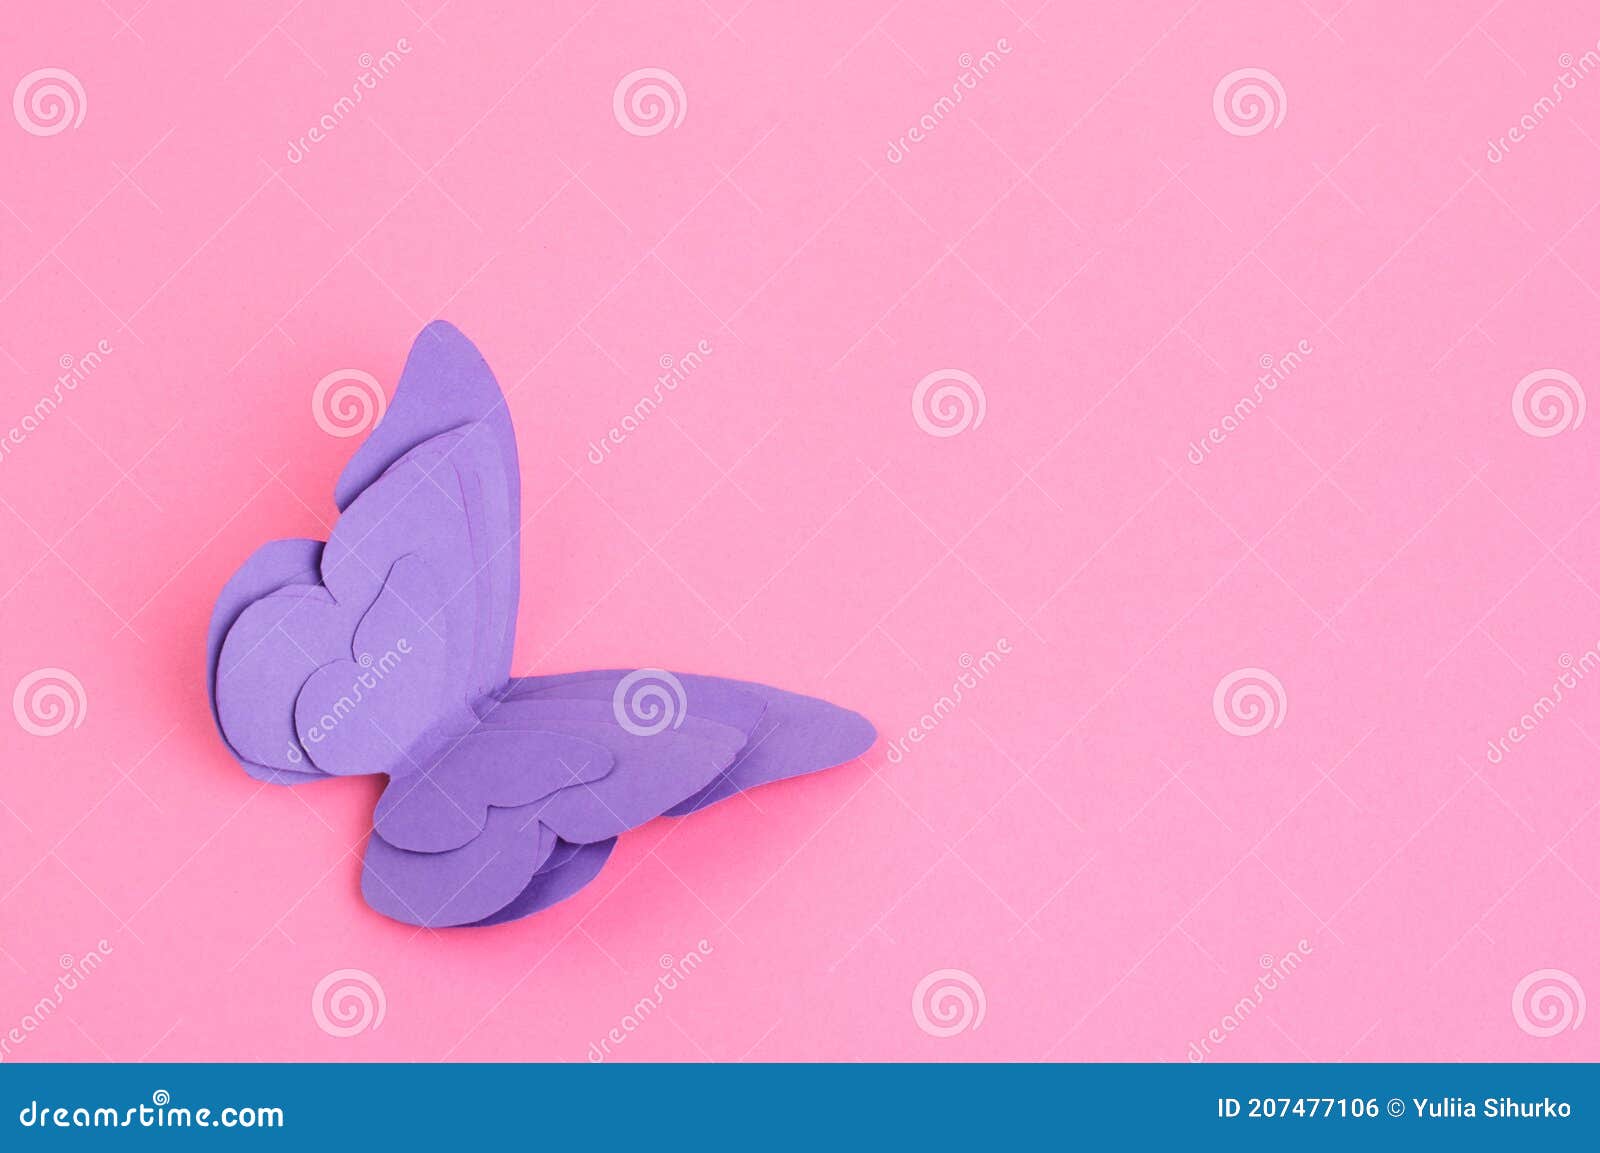 411 Paper Cut Design Butterfly Photos Free Royalty Free Stock Photos From Dreamstime